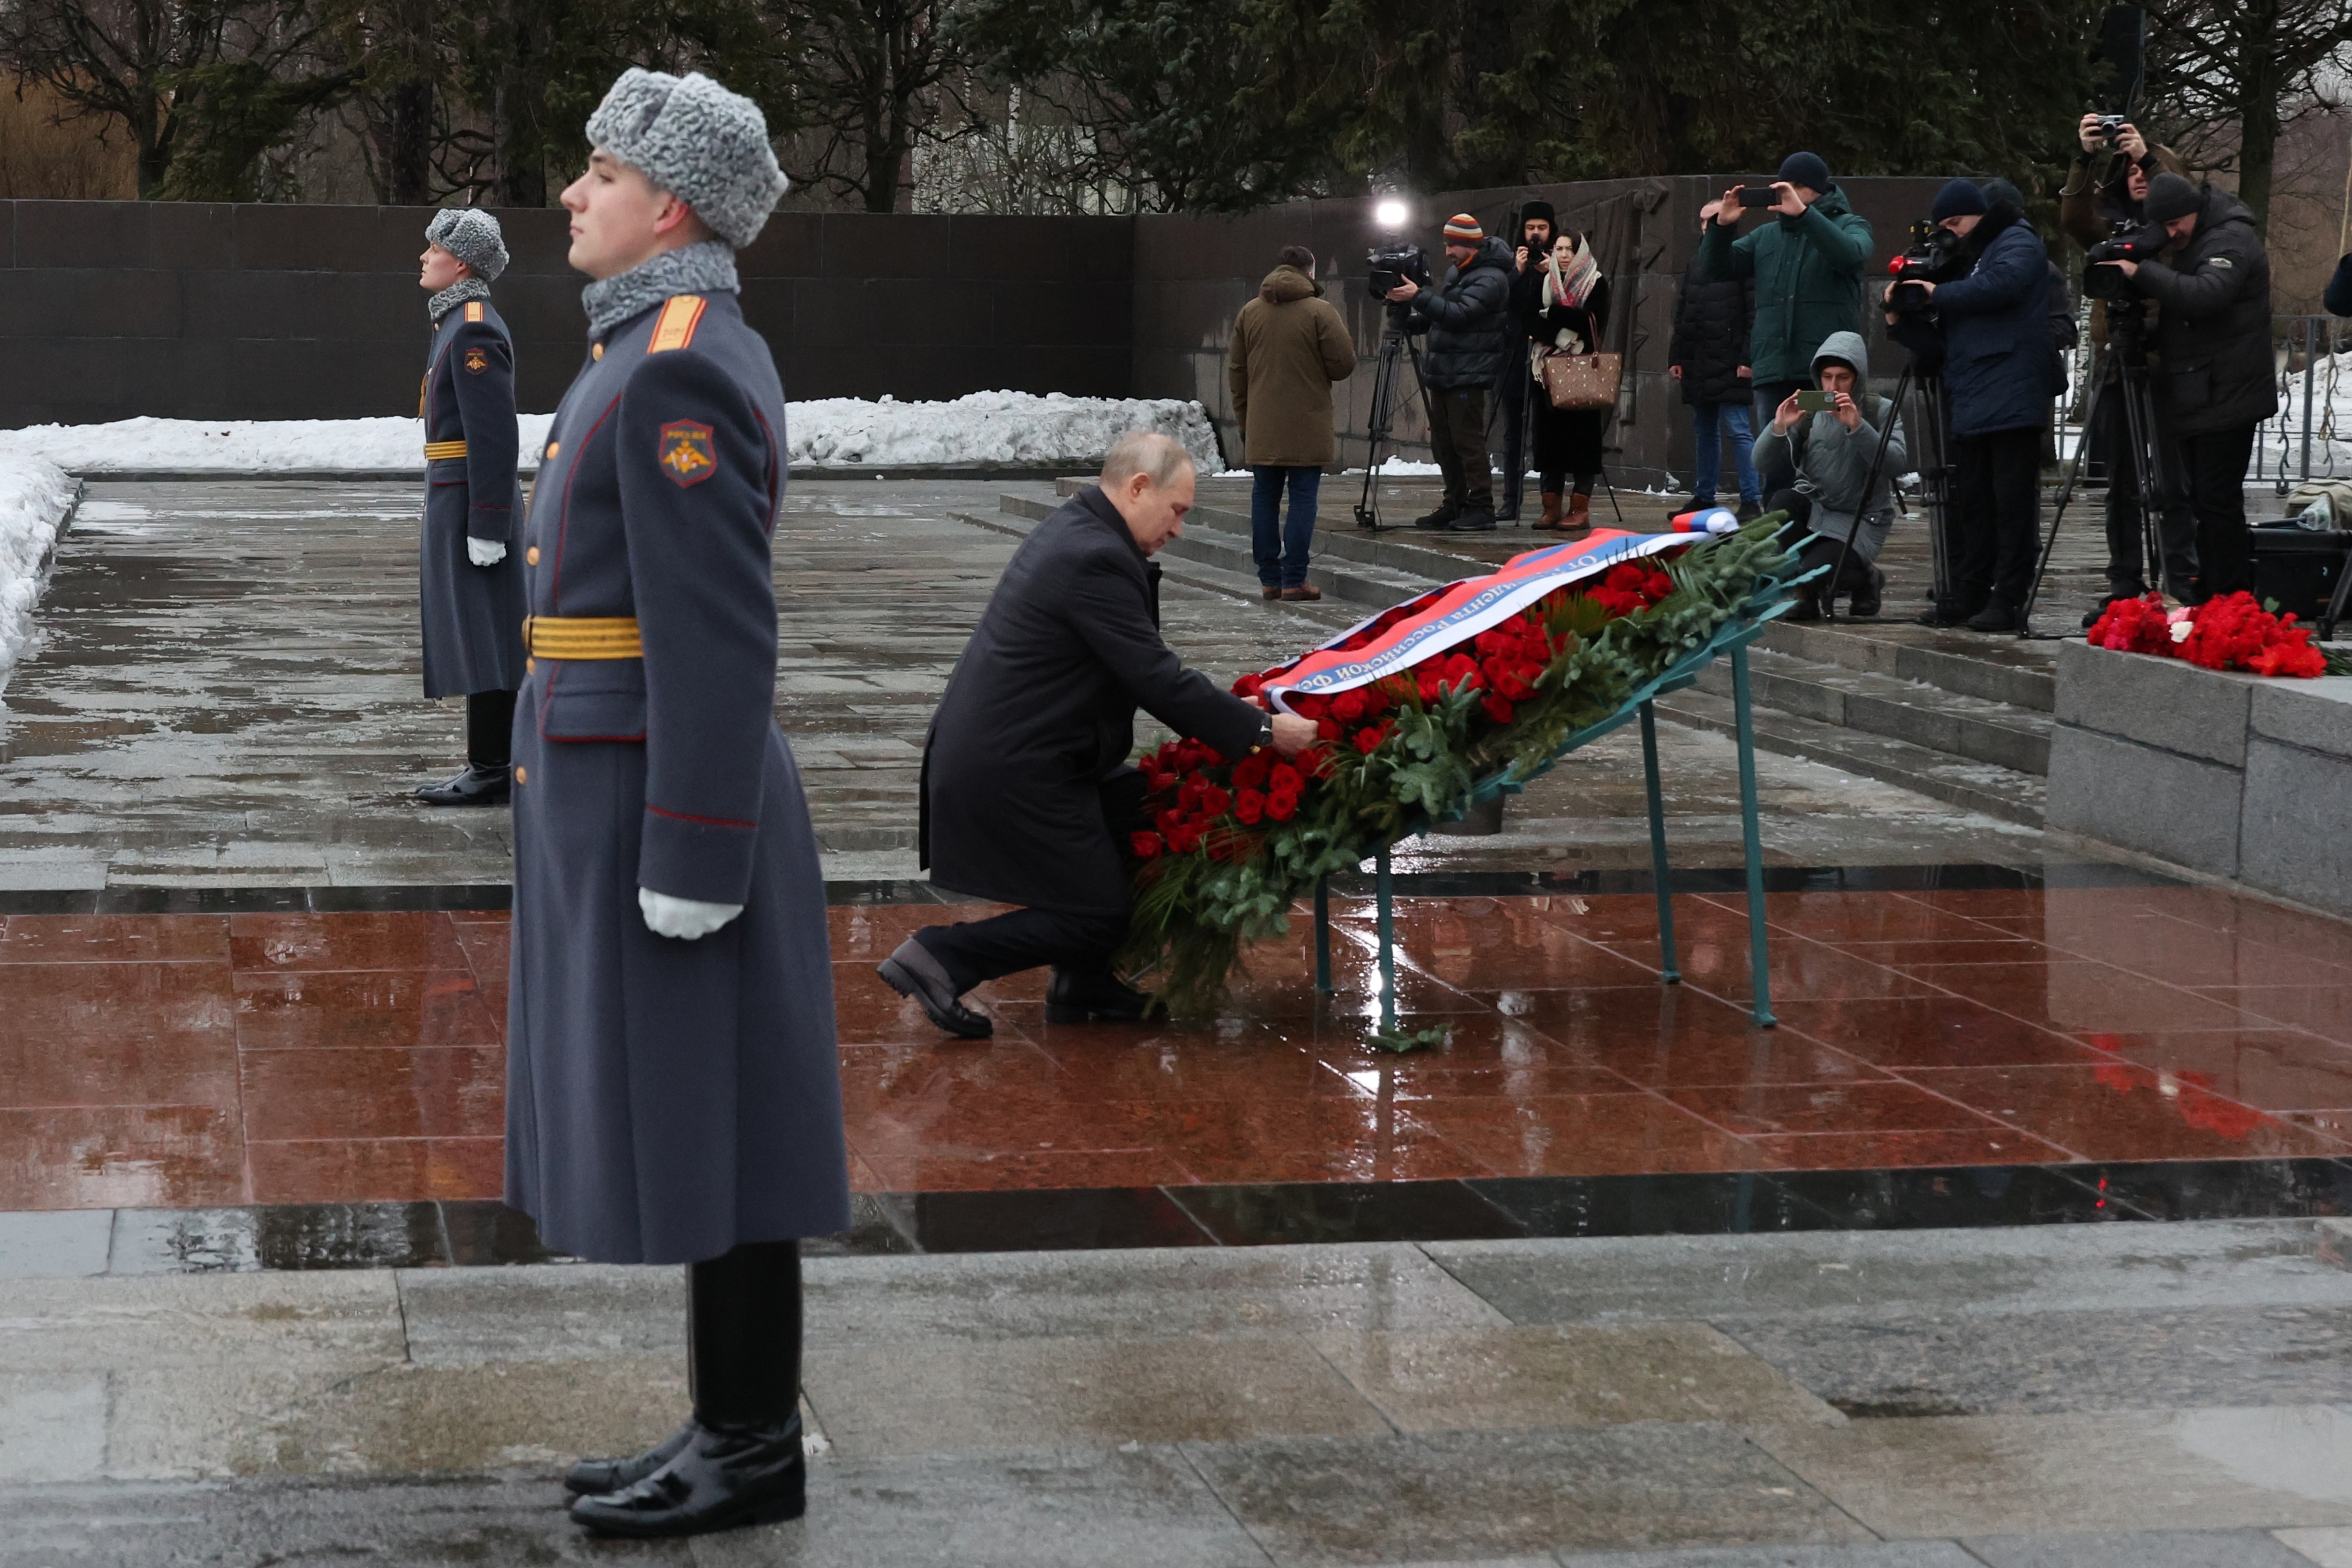 Russian President Vladimir Putin attends events marking the 80th anniversary of the break of Nazi's siege of Leningrad, (now St. Petersburg) during World War Two at the Piskaryovskoye Memorial Cemetery, where hundreds of thousands of siege victims are buried, in St. Petersburg, Russia, Wednesday, Jan. 18, 2023